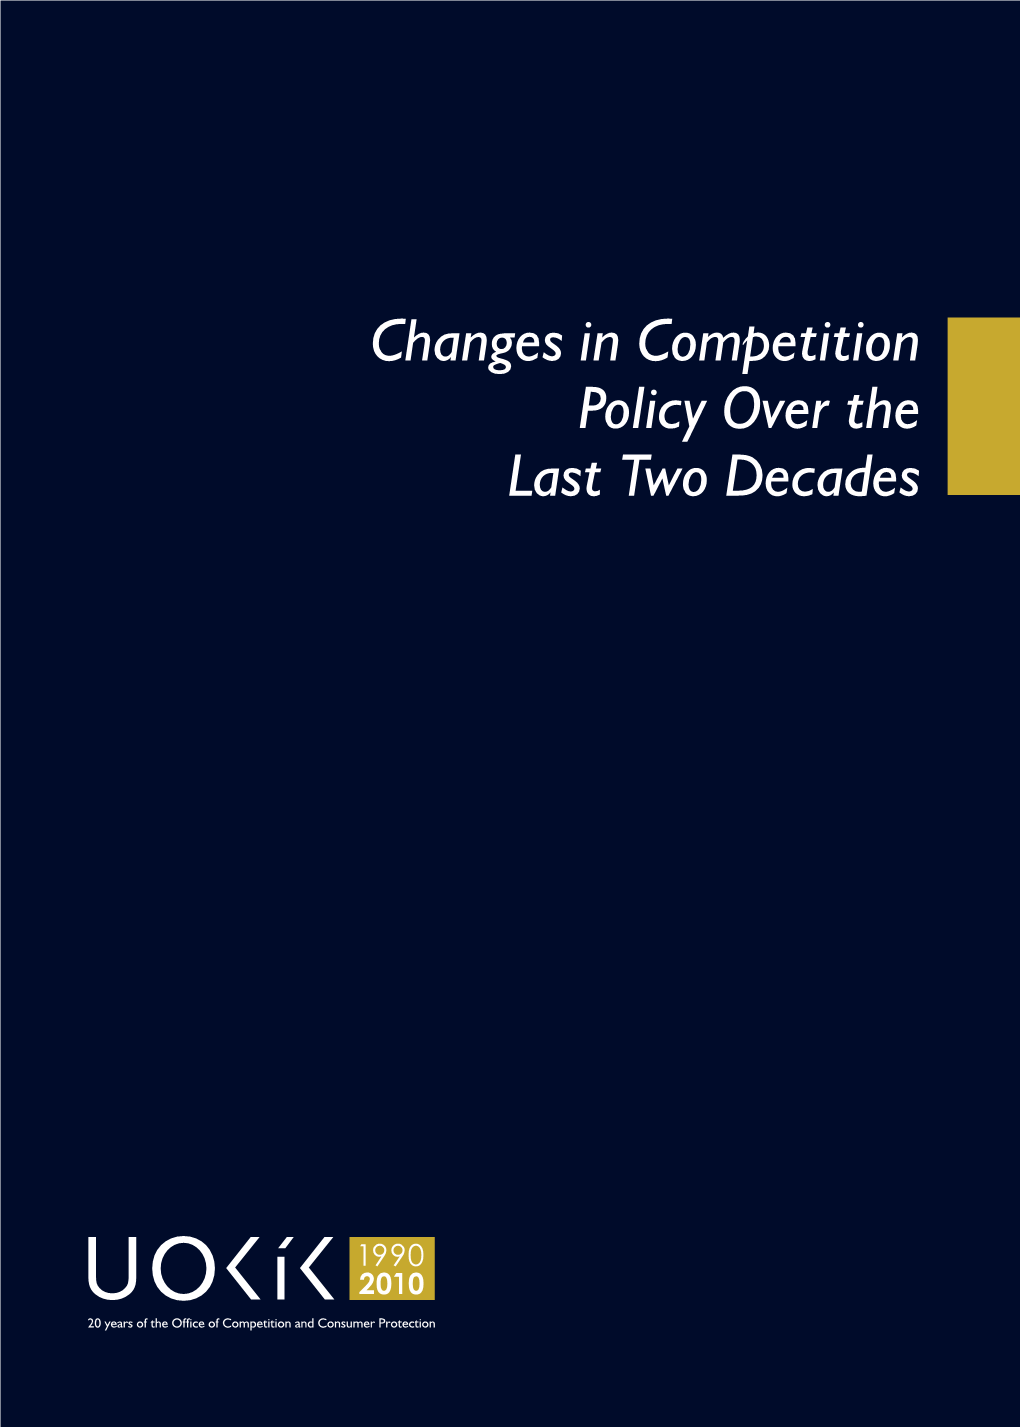 Changes in Competition Policy Over the Last Two Decades